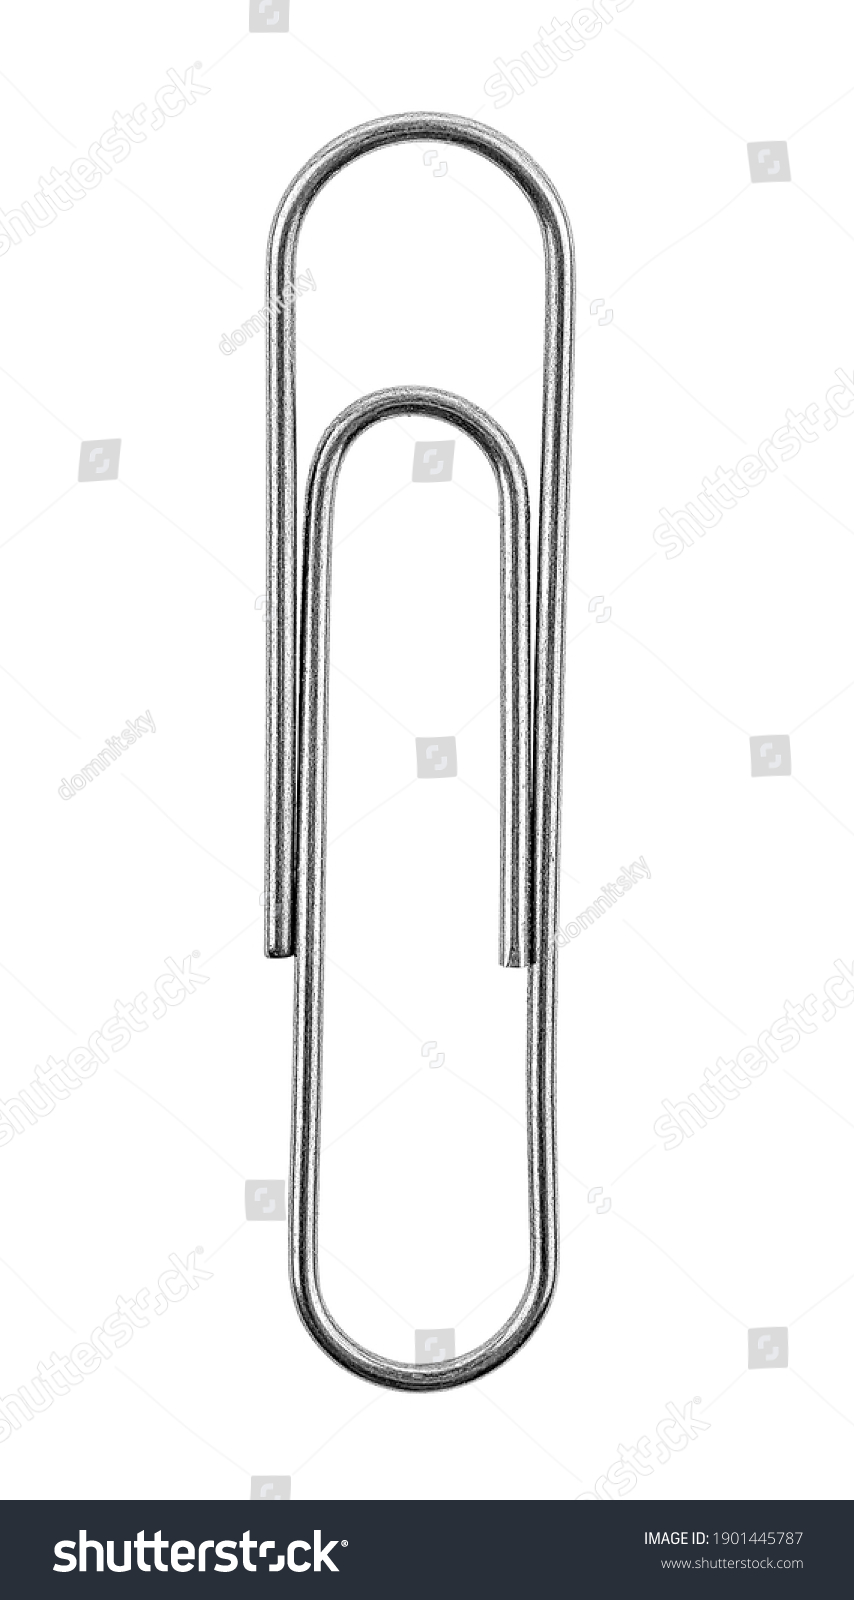 Silver paper clip isolated on a white background, top view. #1901445787